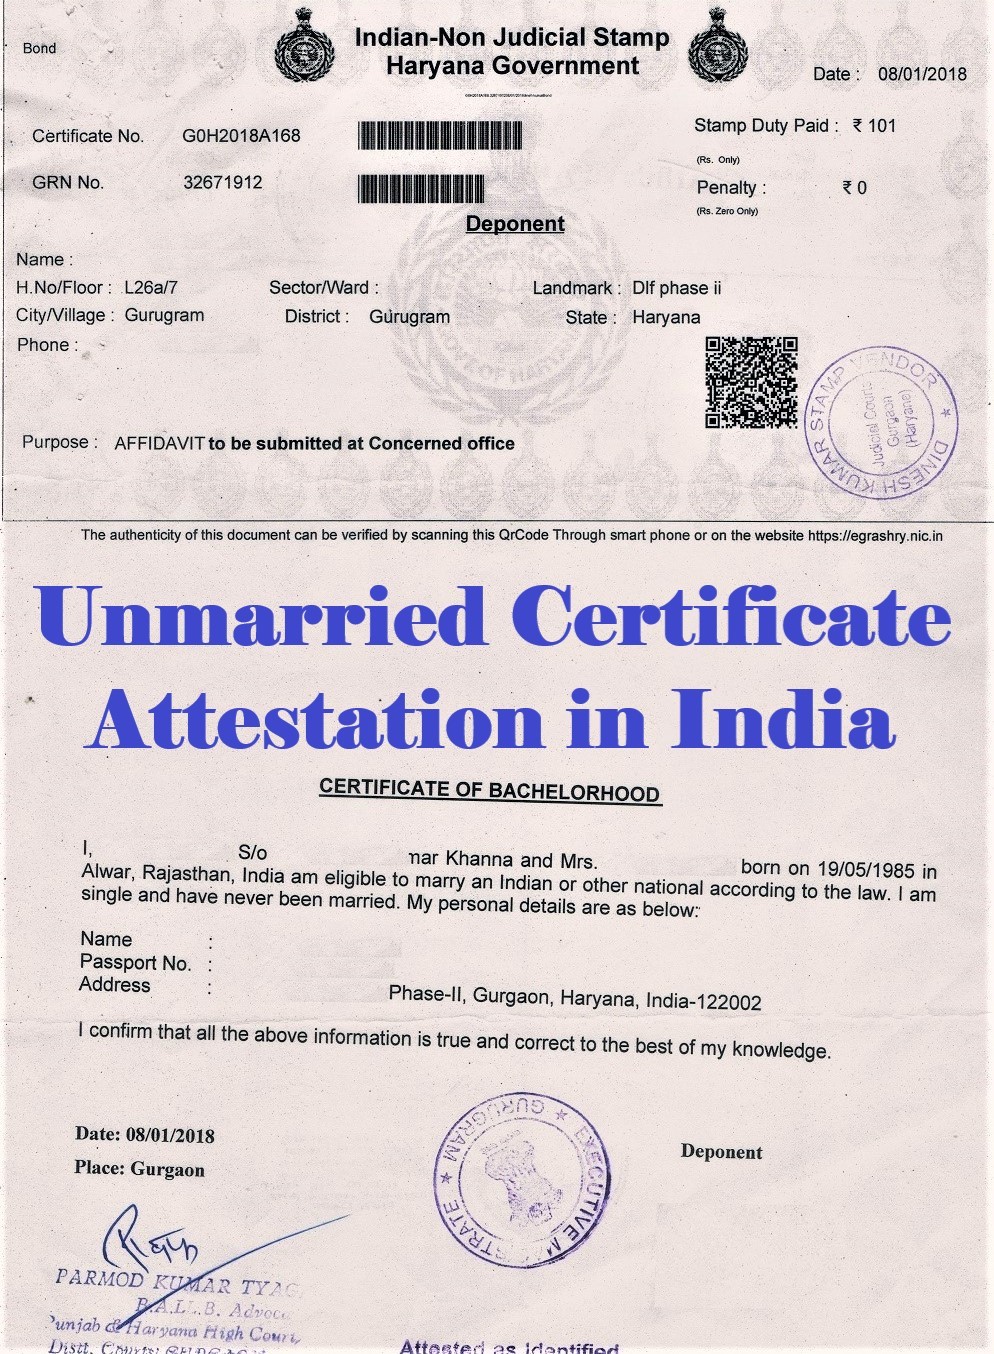 Unmarried Certificate Attestation from Mozambique Embassy